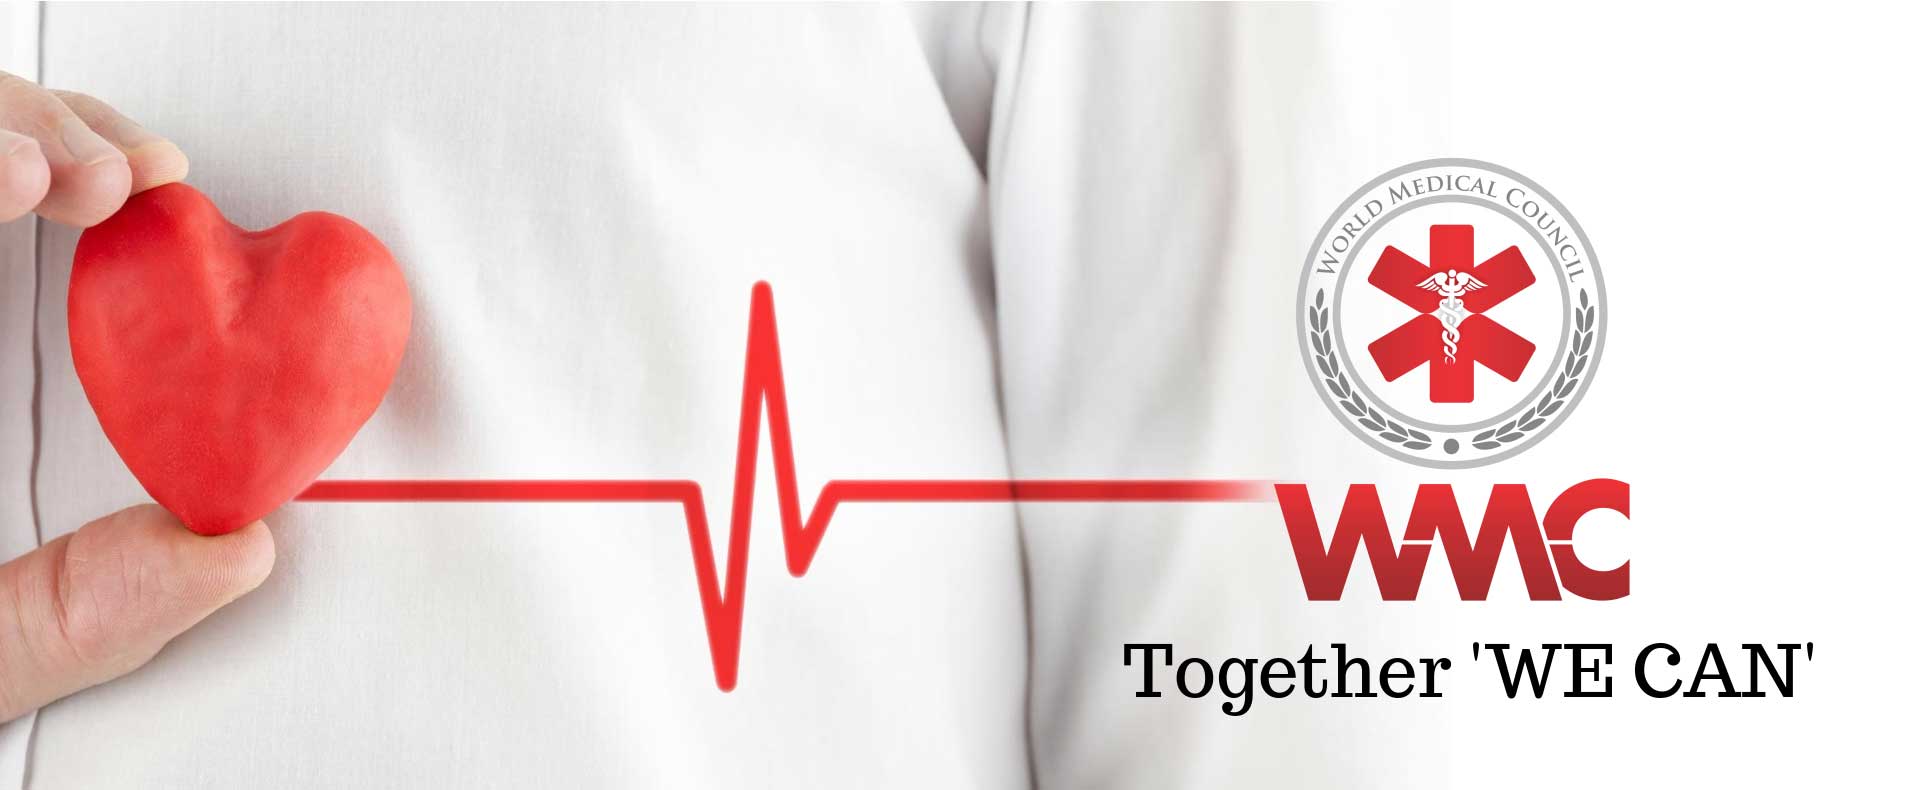 World Medical Council - ‘Together We Can’